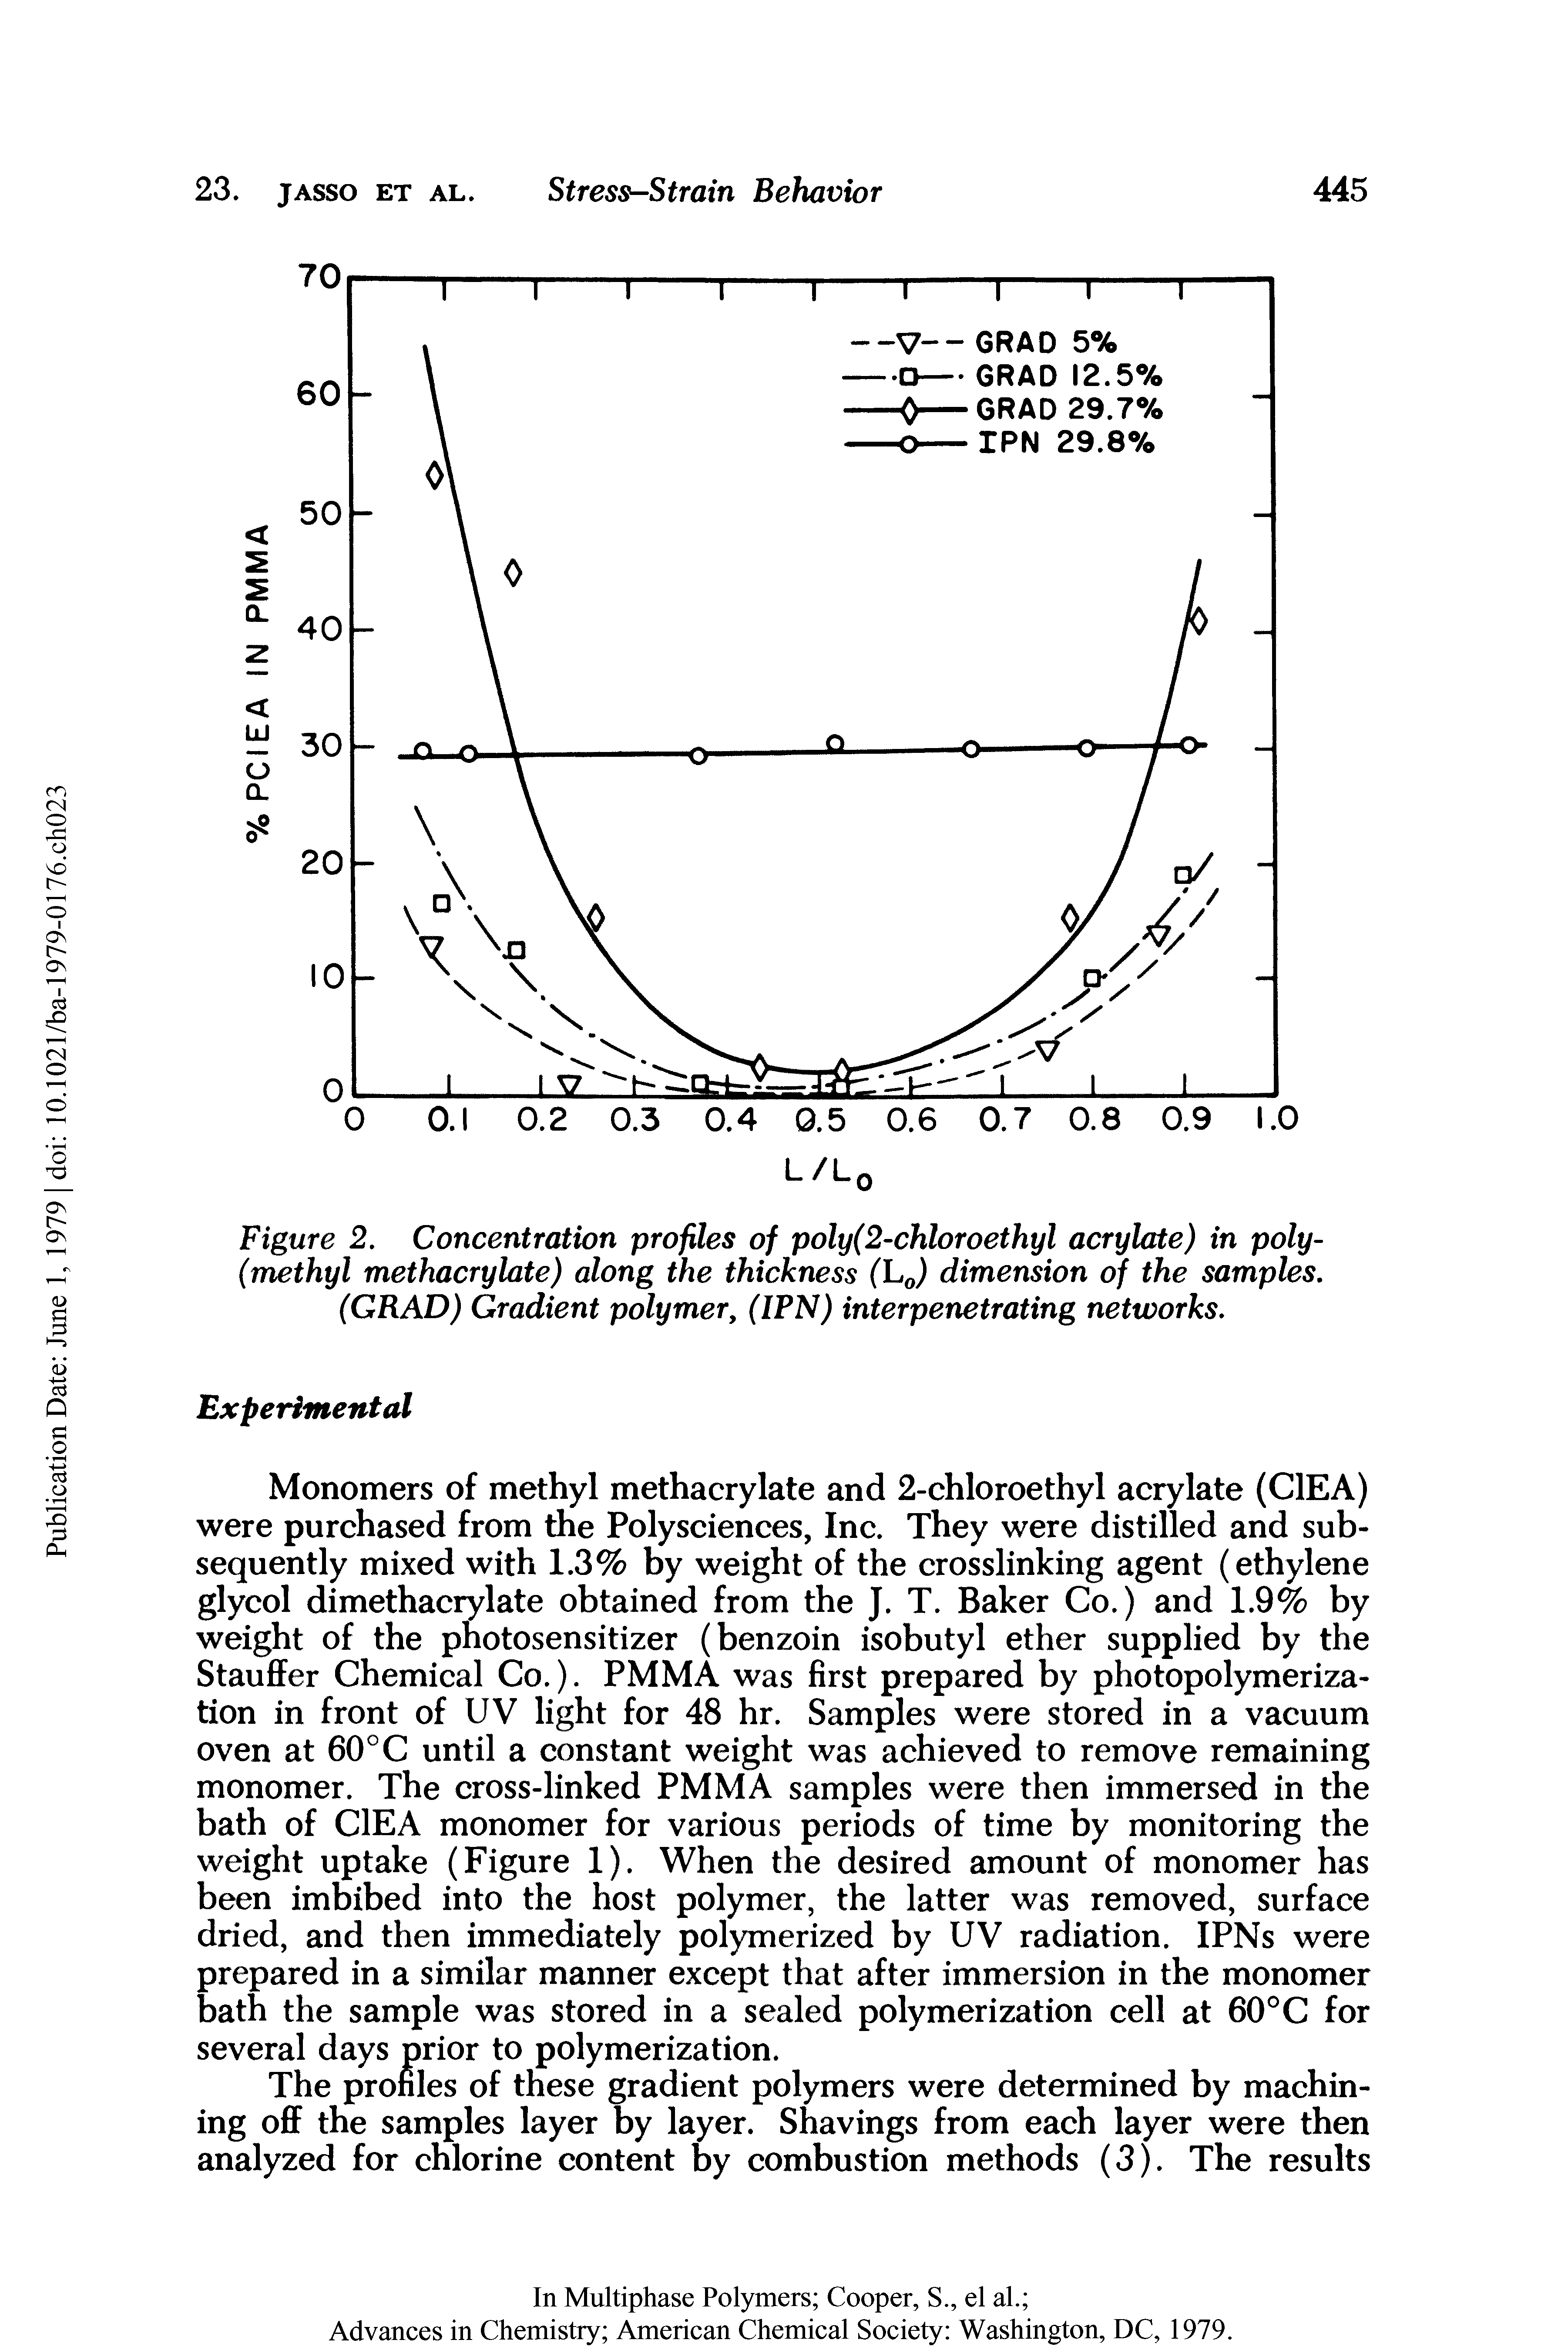 Figure 2. Concentration profiles of poly(2-chloroethyl acrylate) in poly-(methyl methacrylate) along the thickness (L0) dimension of the samples. (GRAD) Gradient polymer, (IPN) interpenetrating networks.